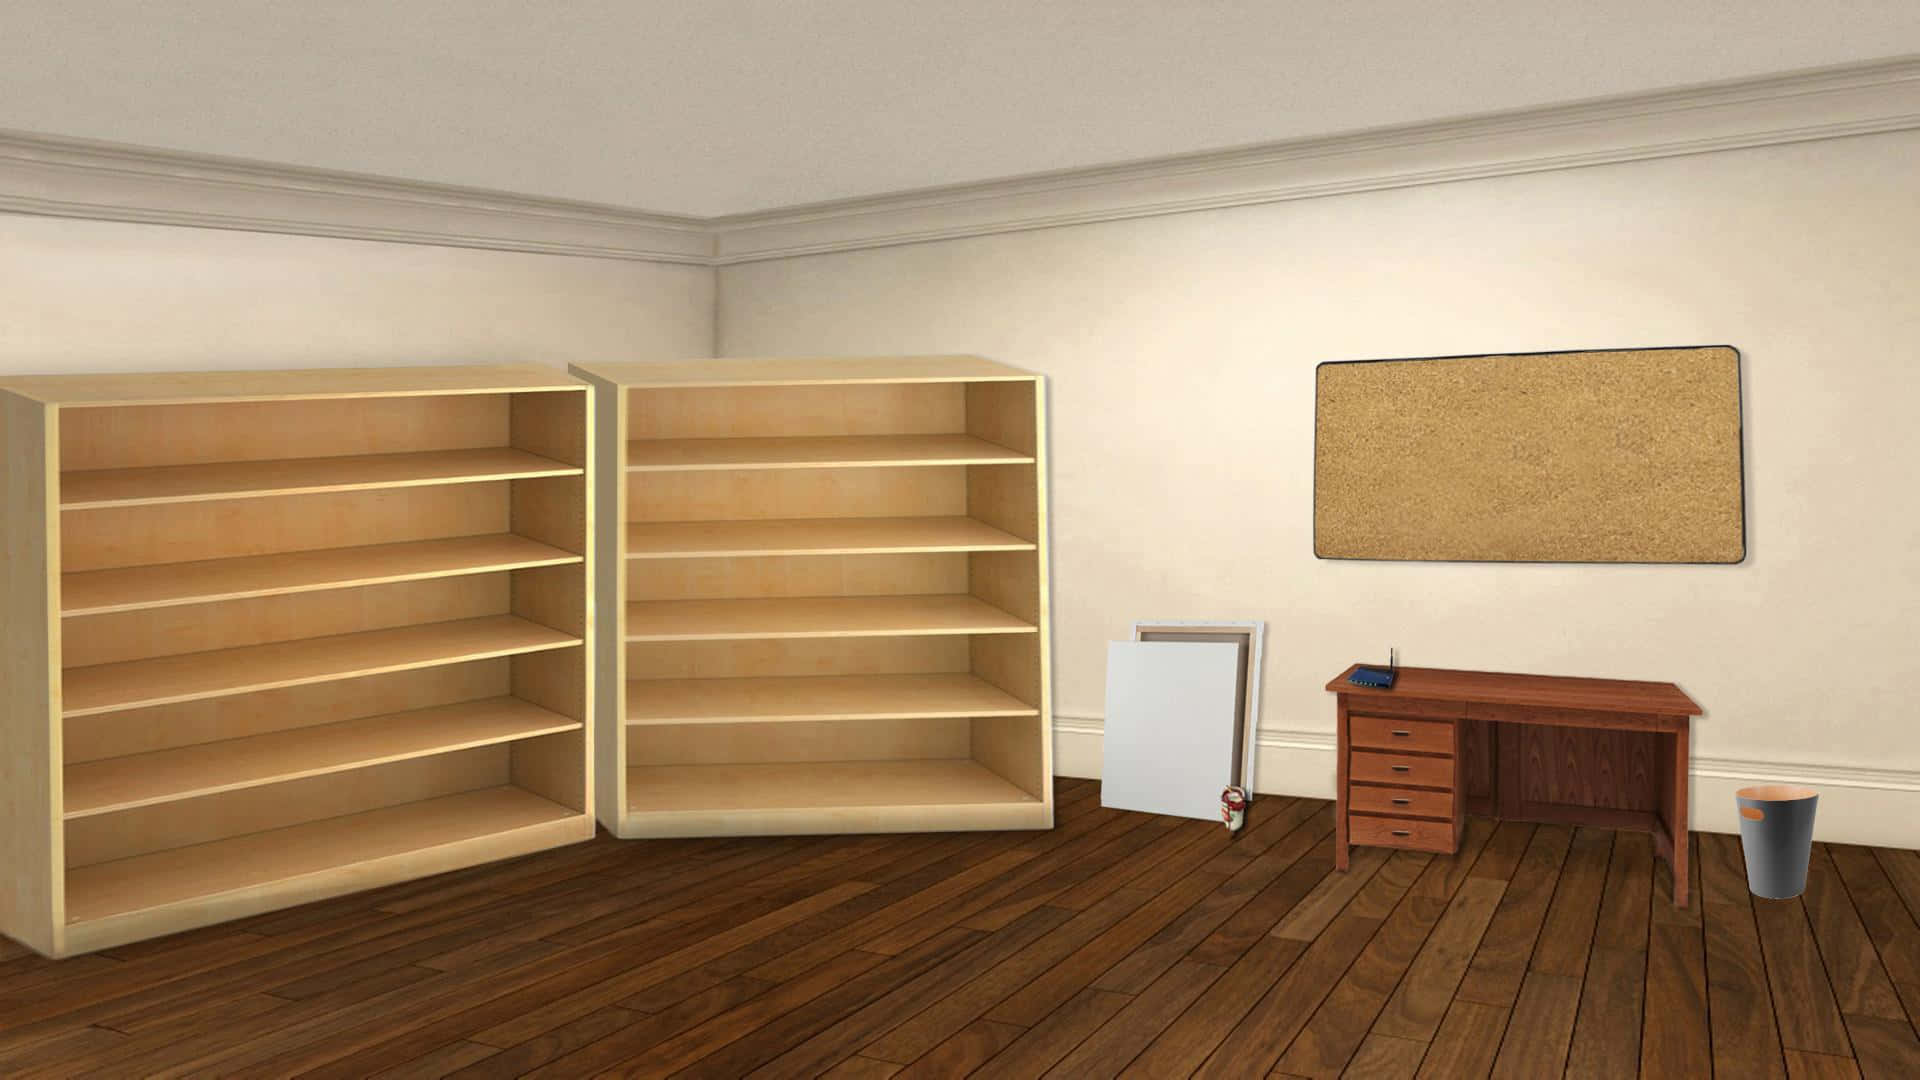 Download A Room With A Desk And Bookshelves | Wallpapers.com